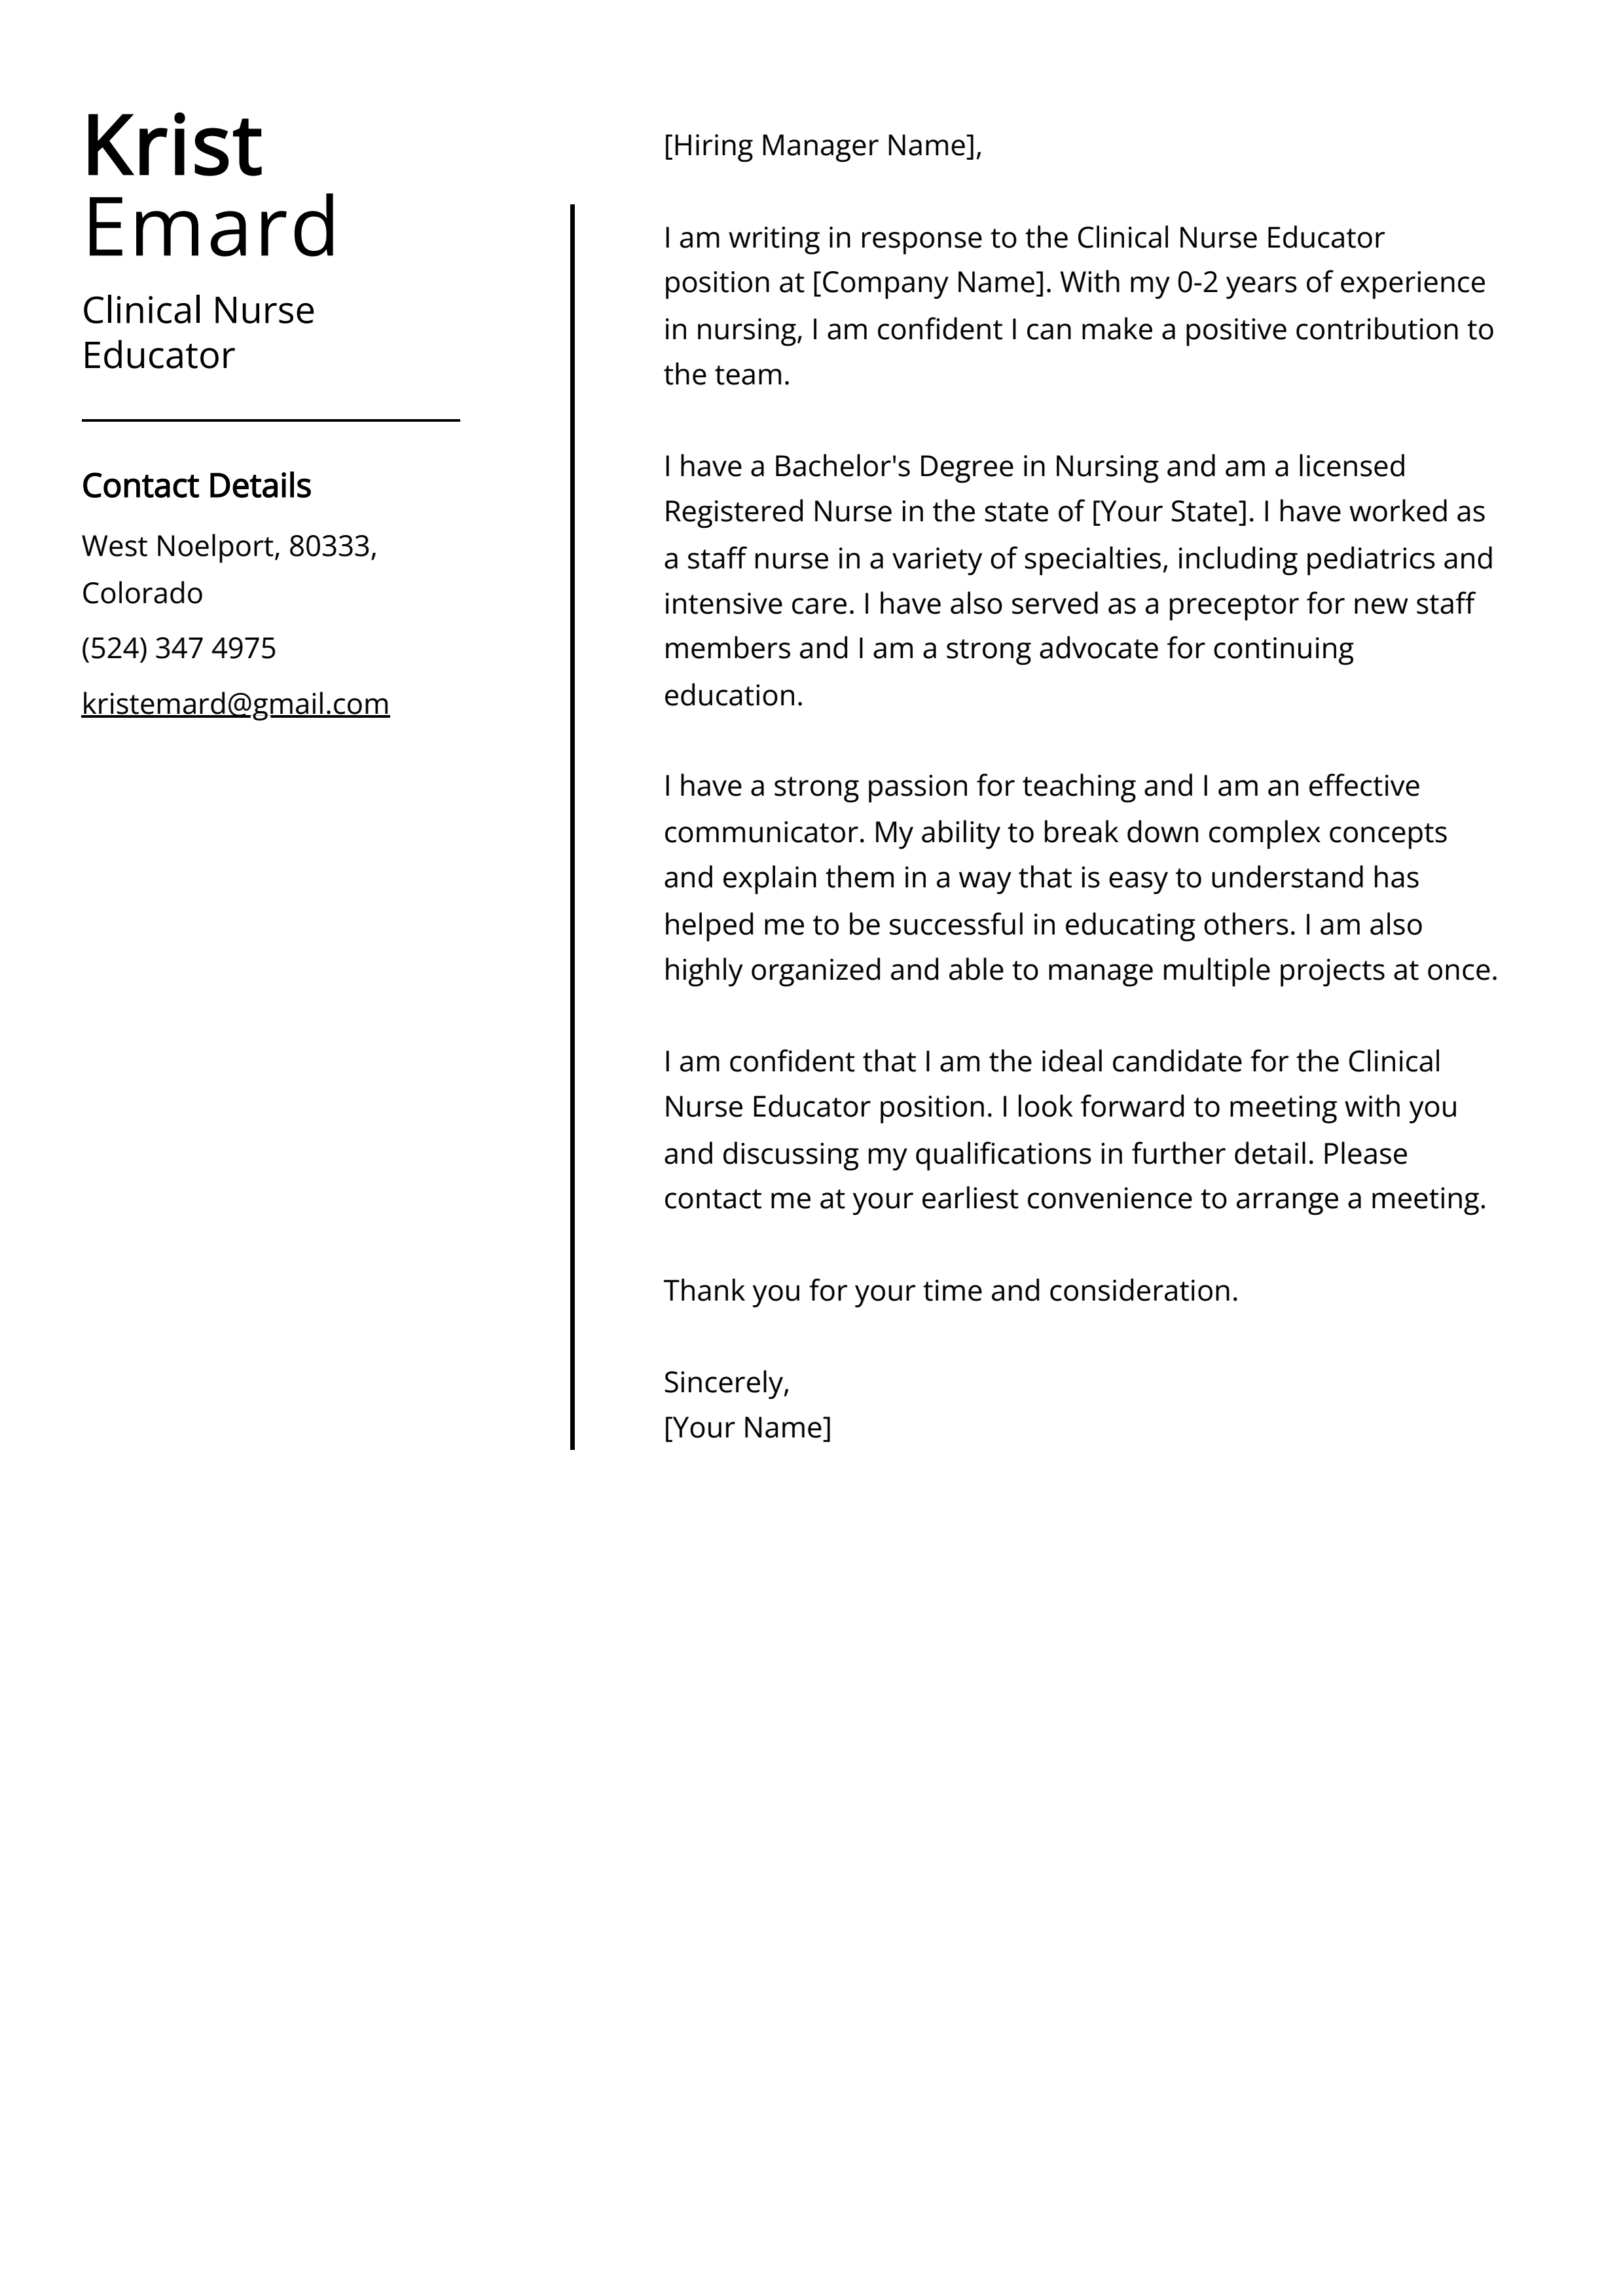 Clinical Nurse Educator Cover Letter Example